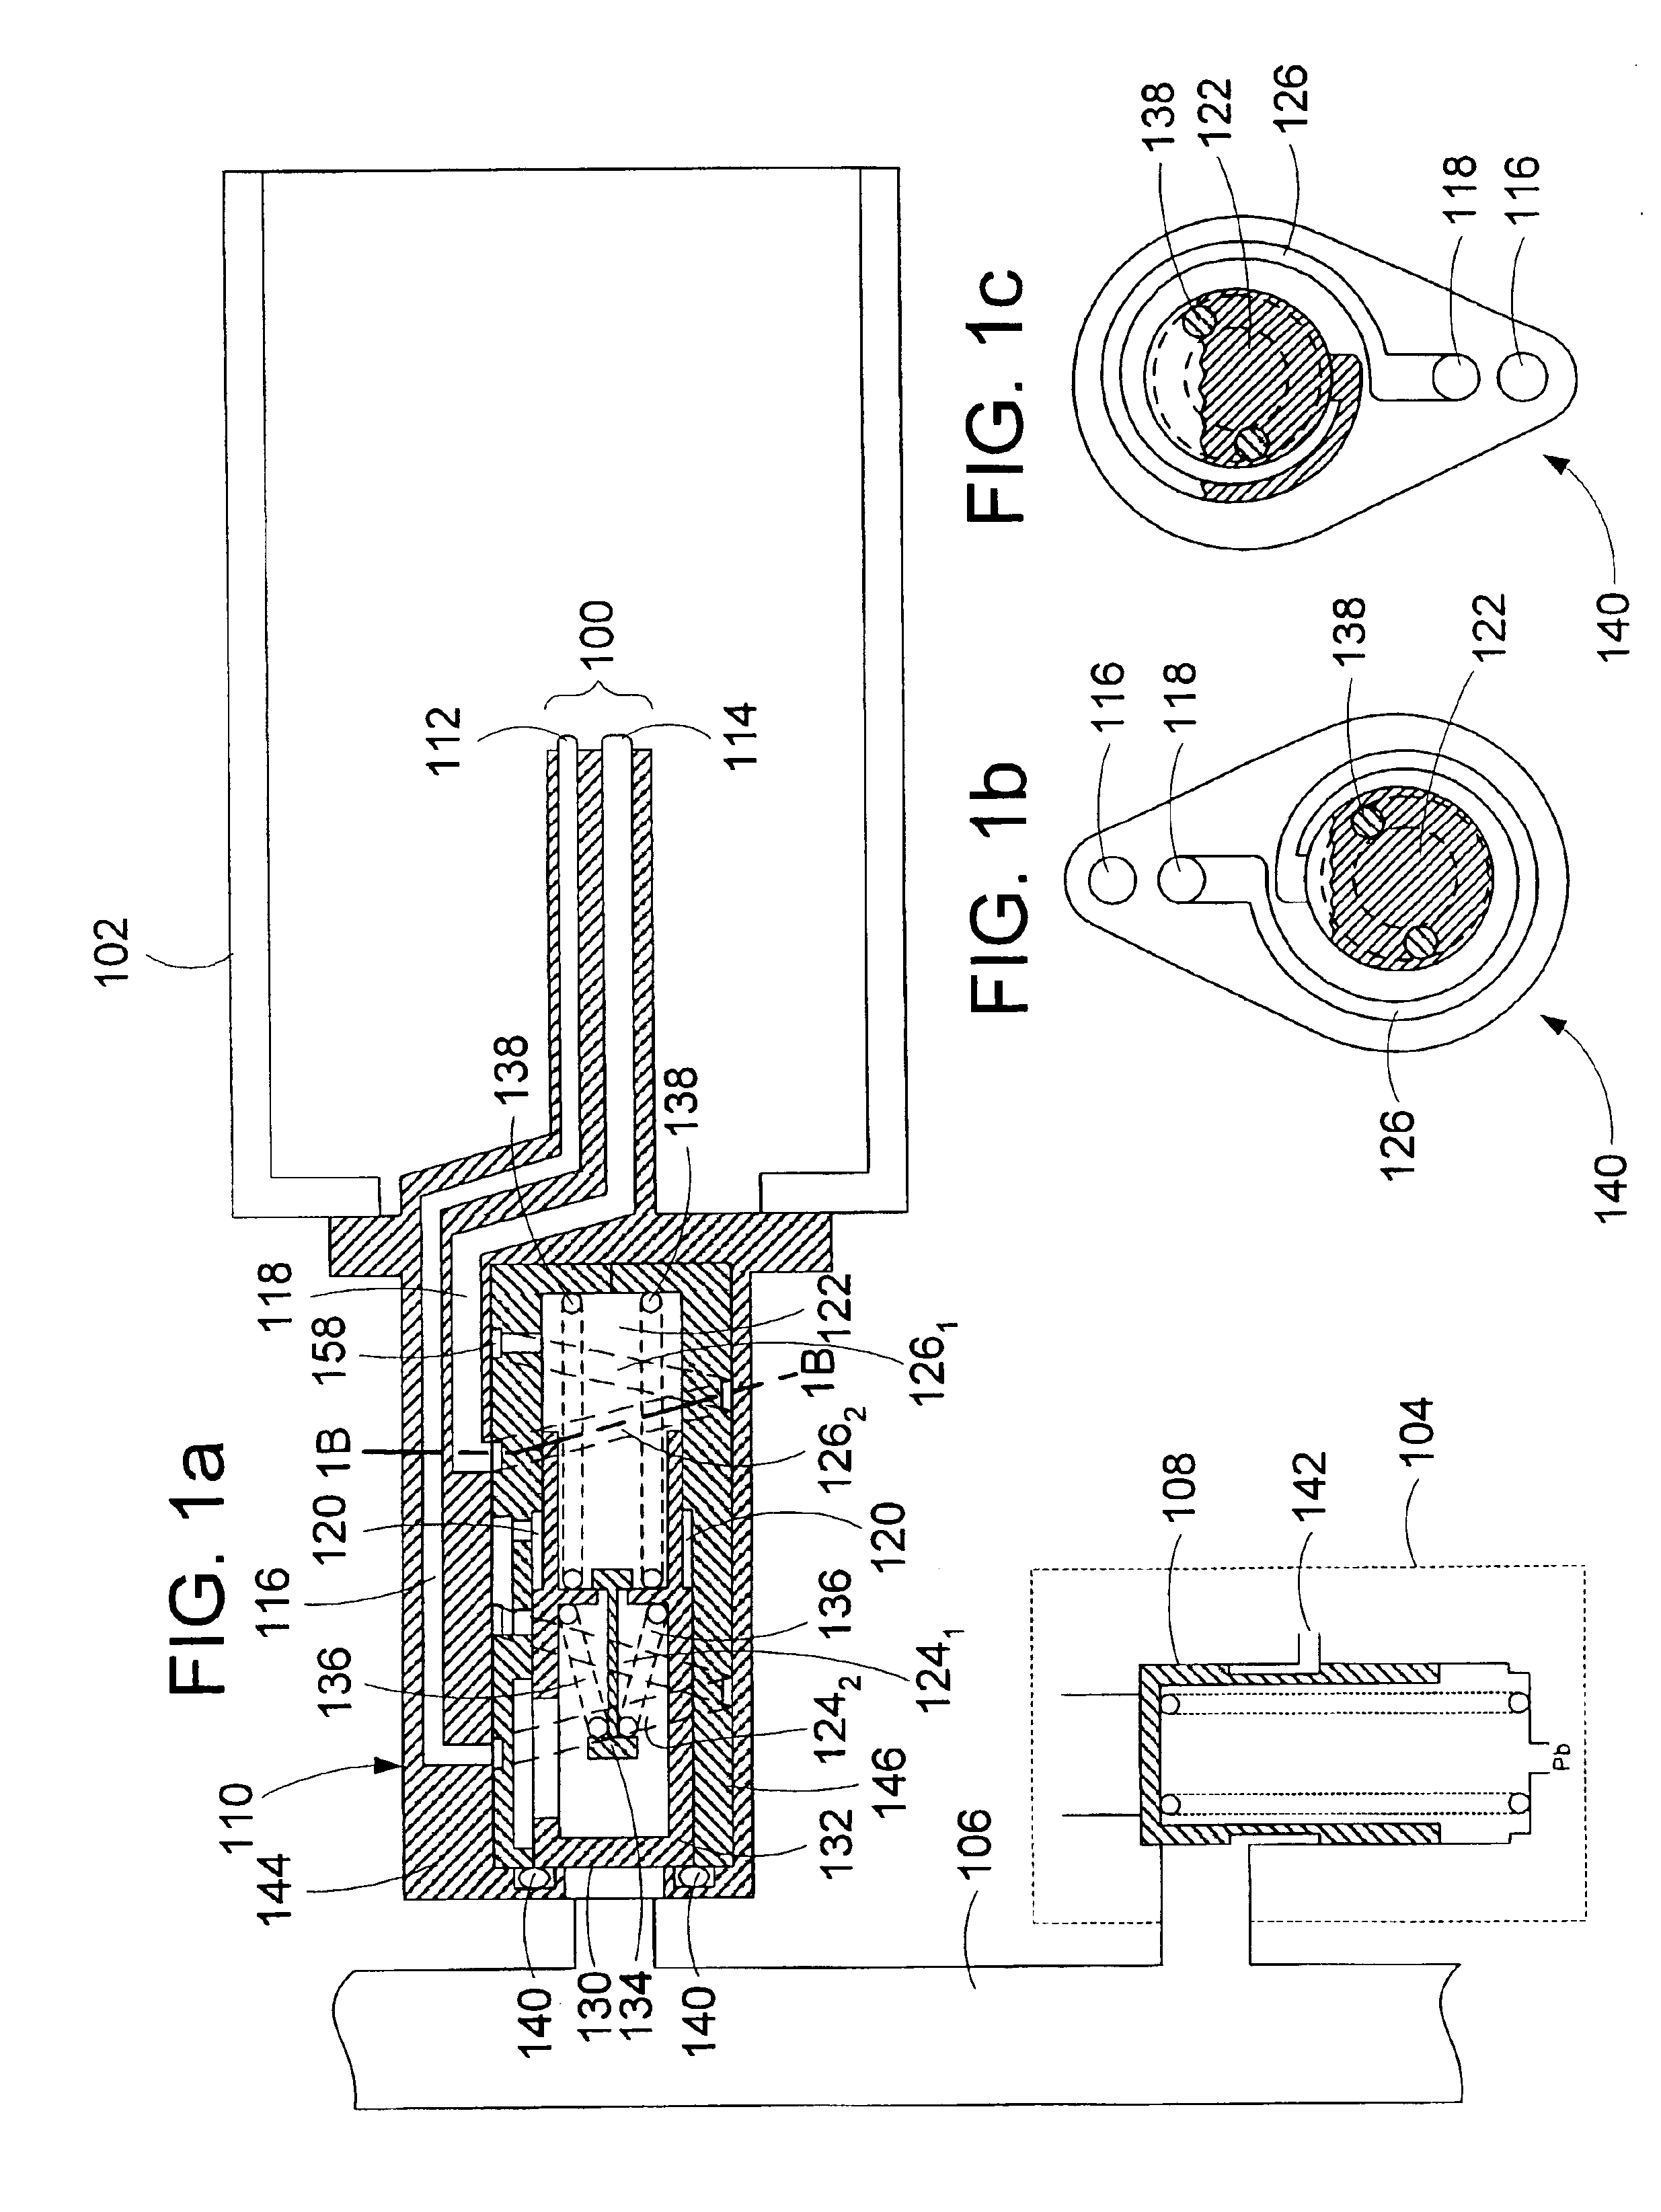 Nozzle assembly with flow divider and ecology valve